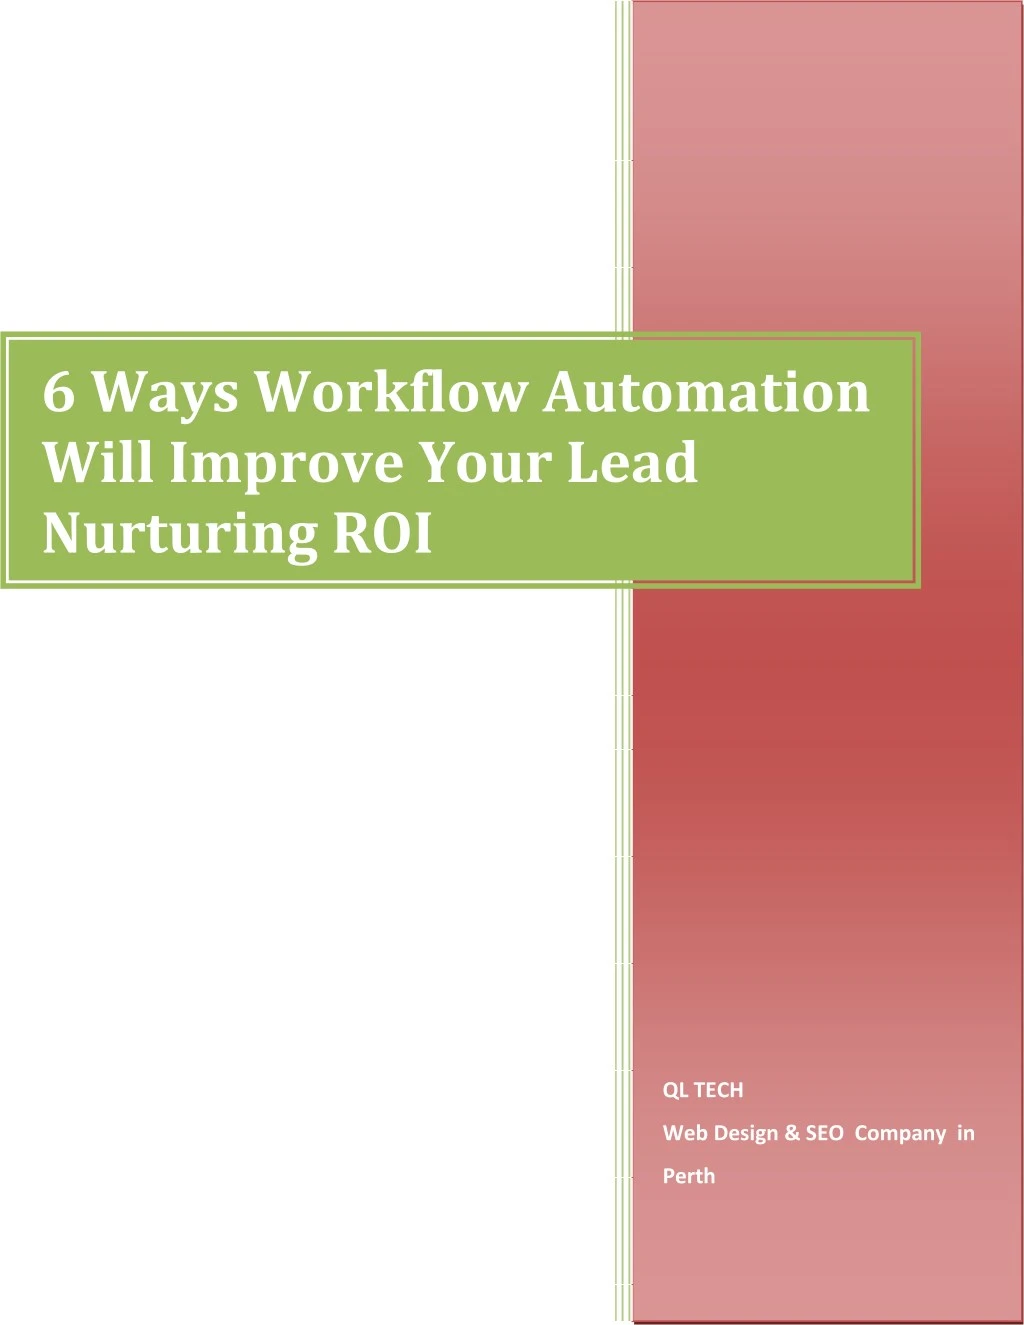 6 ways workflow automation will improve your lead